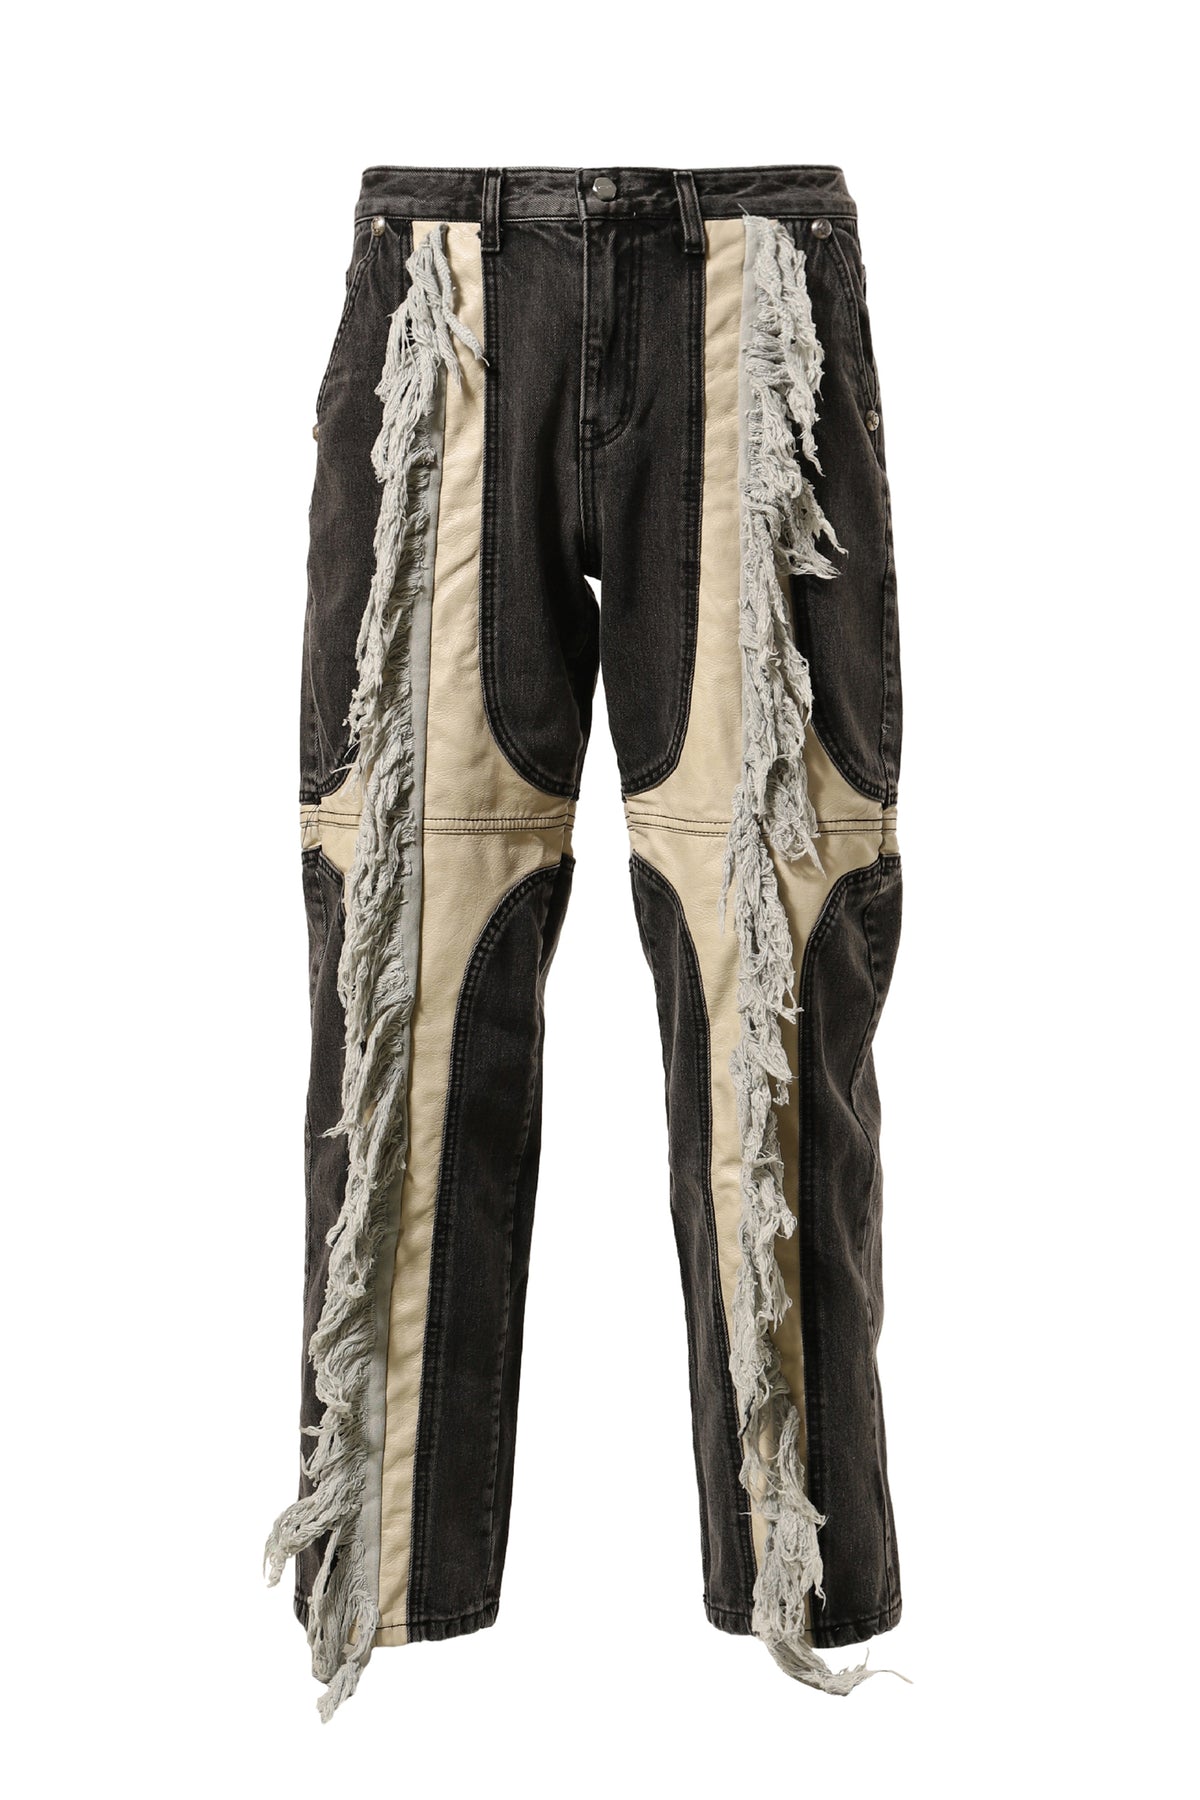 MOHICAN LEATHER DENIM PANTS / BLK IVORY